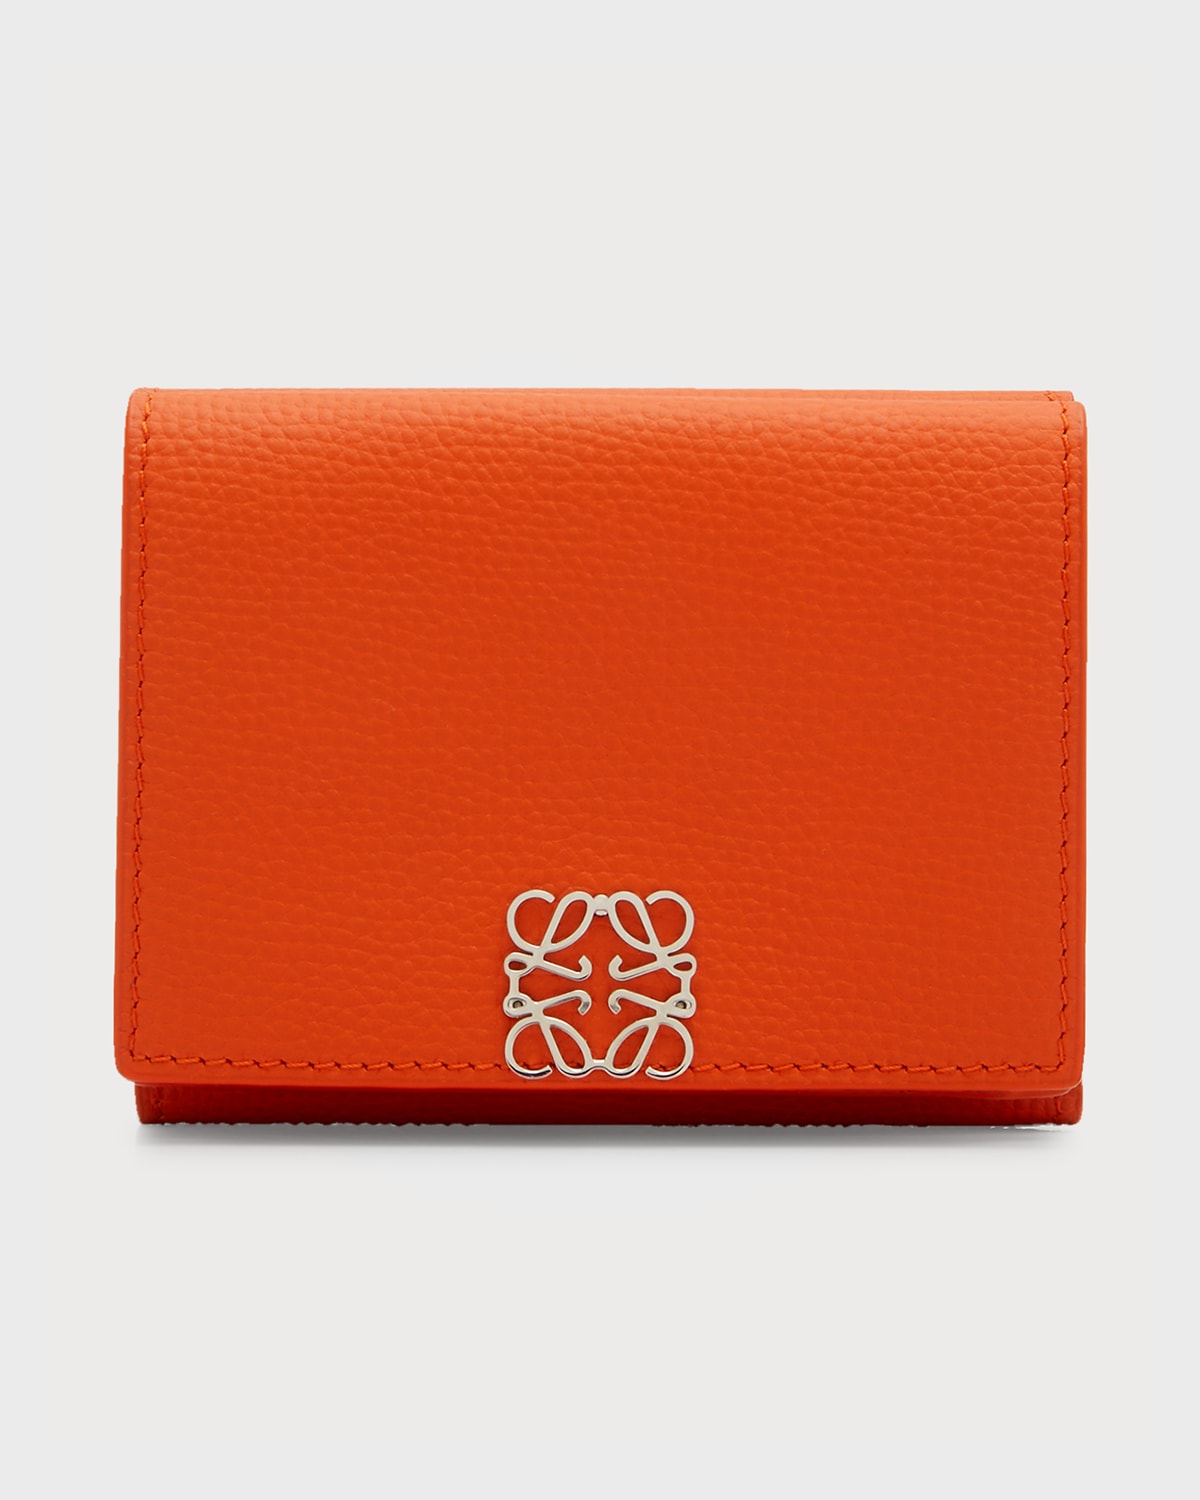 MCM Tracy Trifold Mini Leather Wallet | Neiman Marcus